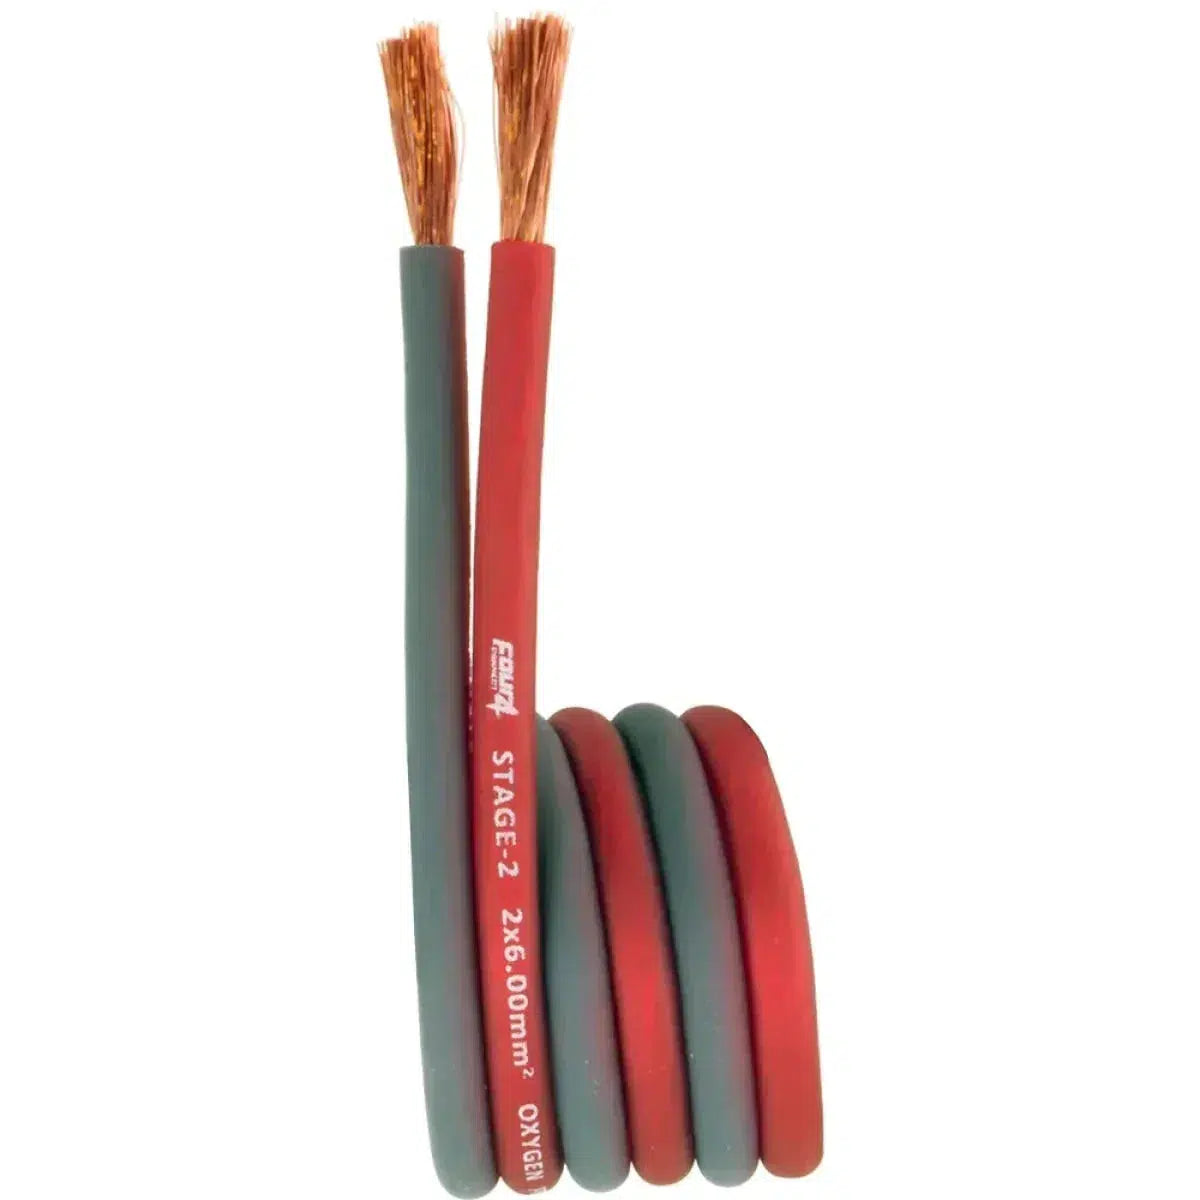 Four Connect-Stage2 2x6mm² OFC 70m-2x6mm² Loudspeaker cables-Masori.co.uk